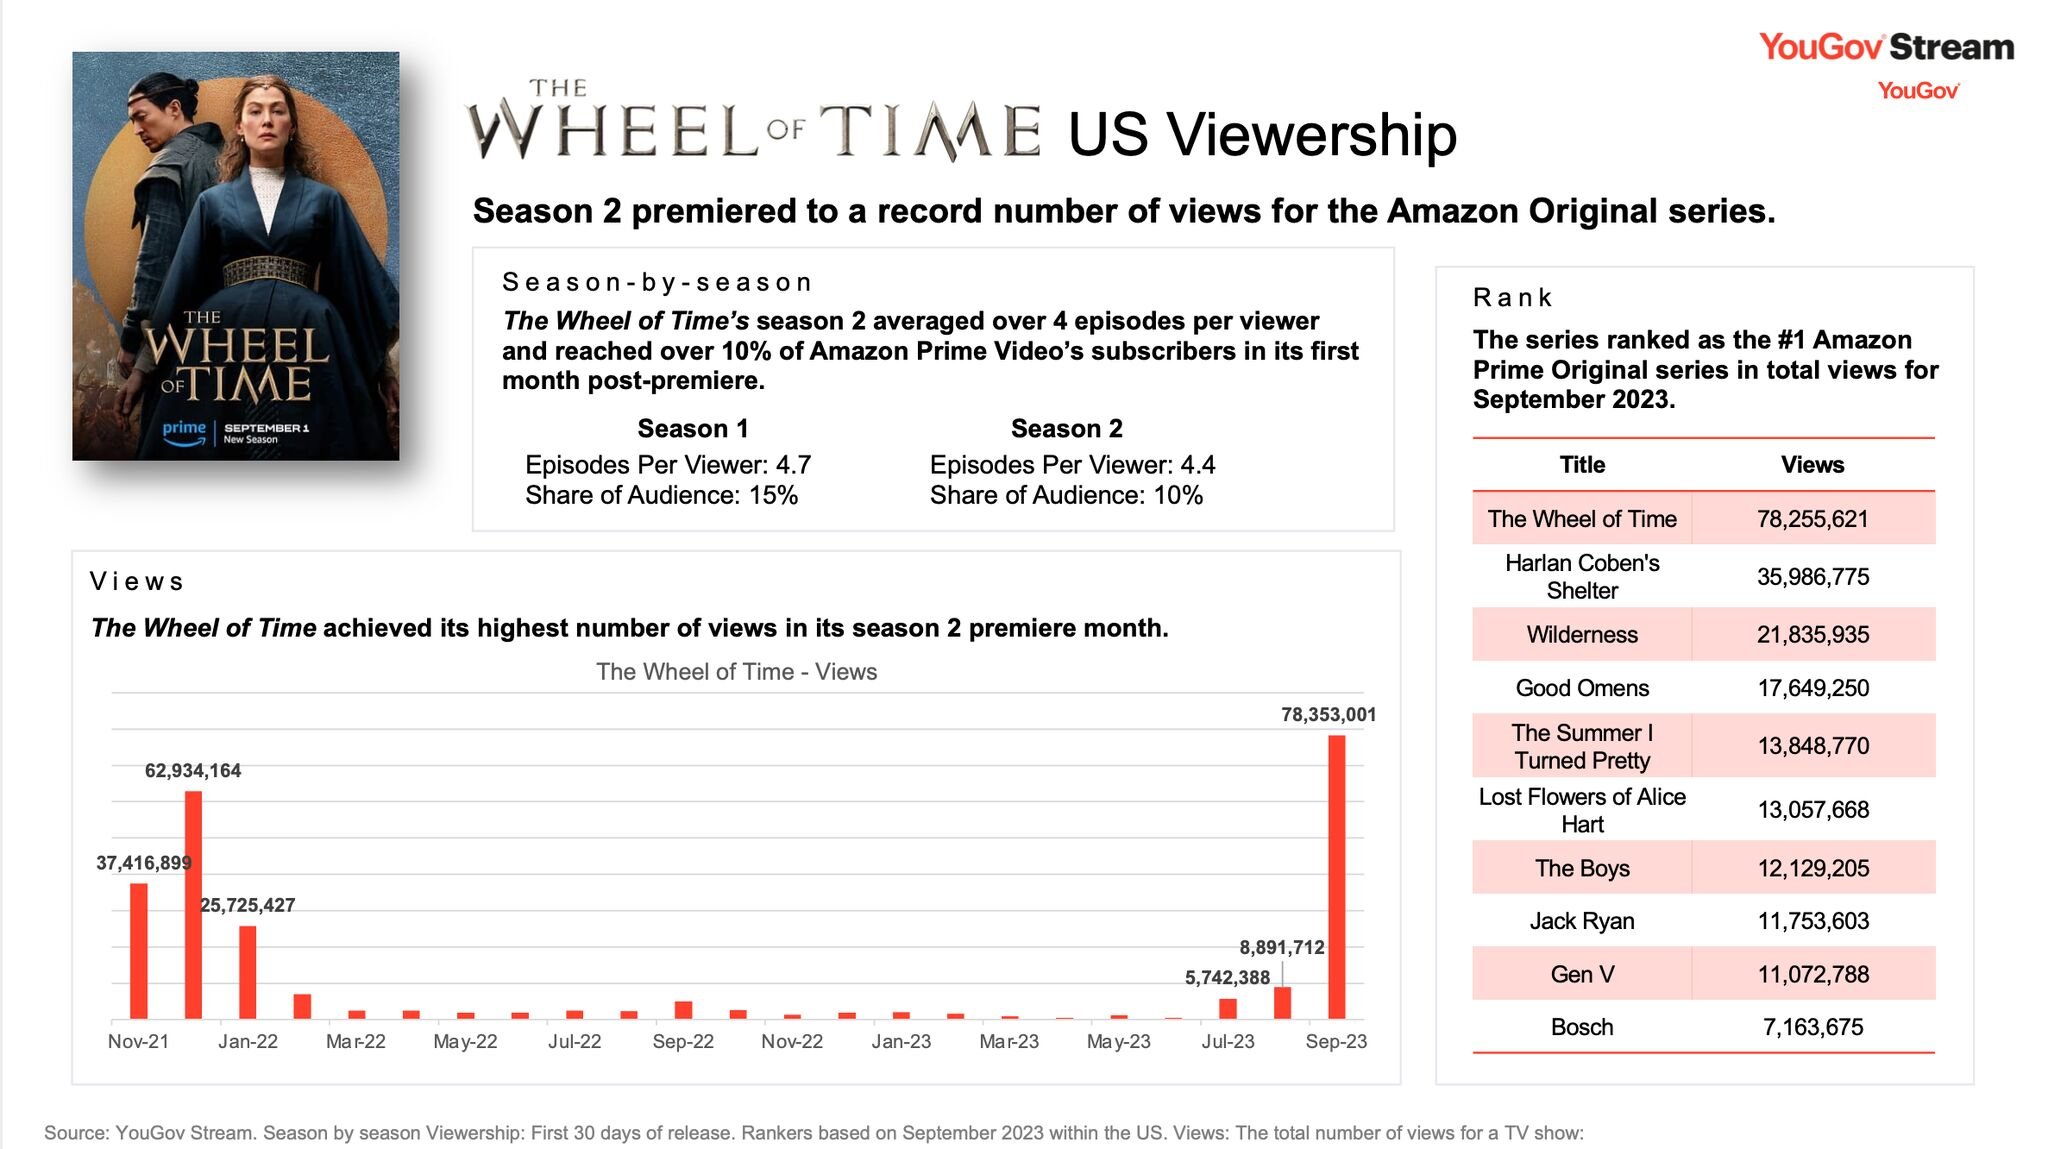 A graphic with viewership figures about the Wheel of Time by YouGov. Text at the top reads: Wheel of Time US Viewership. Below it: Season 2 premiered to a record number of views for the Amazon Original series. 
Below it, in a box: Season-by-season, The Wheel of Time's season 2 averaged over 4 episodes per viewer and reached over 10% of Amazon Prime Video's subscribers in its first month post-premier. 
Season 1: episodes per viewer: 4.7, share of audience 15%. 
Season 2: episodes per viewer: 4.4, share of audience: 10%
September 2023 Views ranking for Prime Video: Wheel of Time in the top spot with 78,255,612 views. Then 9 programs appear in the list, 2nd being Harlan Coben's Shelter with 35,986,775 views. There's also a bar chart showing views for season 1 and season 2. Nov-21: 37m, Dec-21: 62m, Jan-22: 25m. Jul-23 5.7m, Aug-23: 9m, Sep-23: 78m